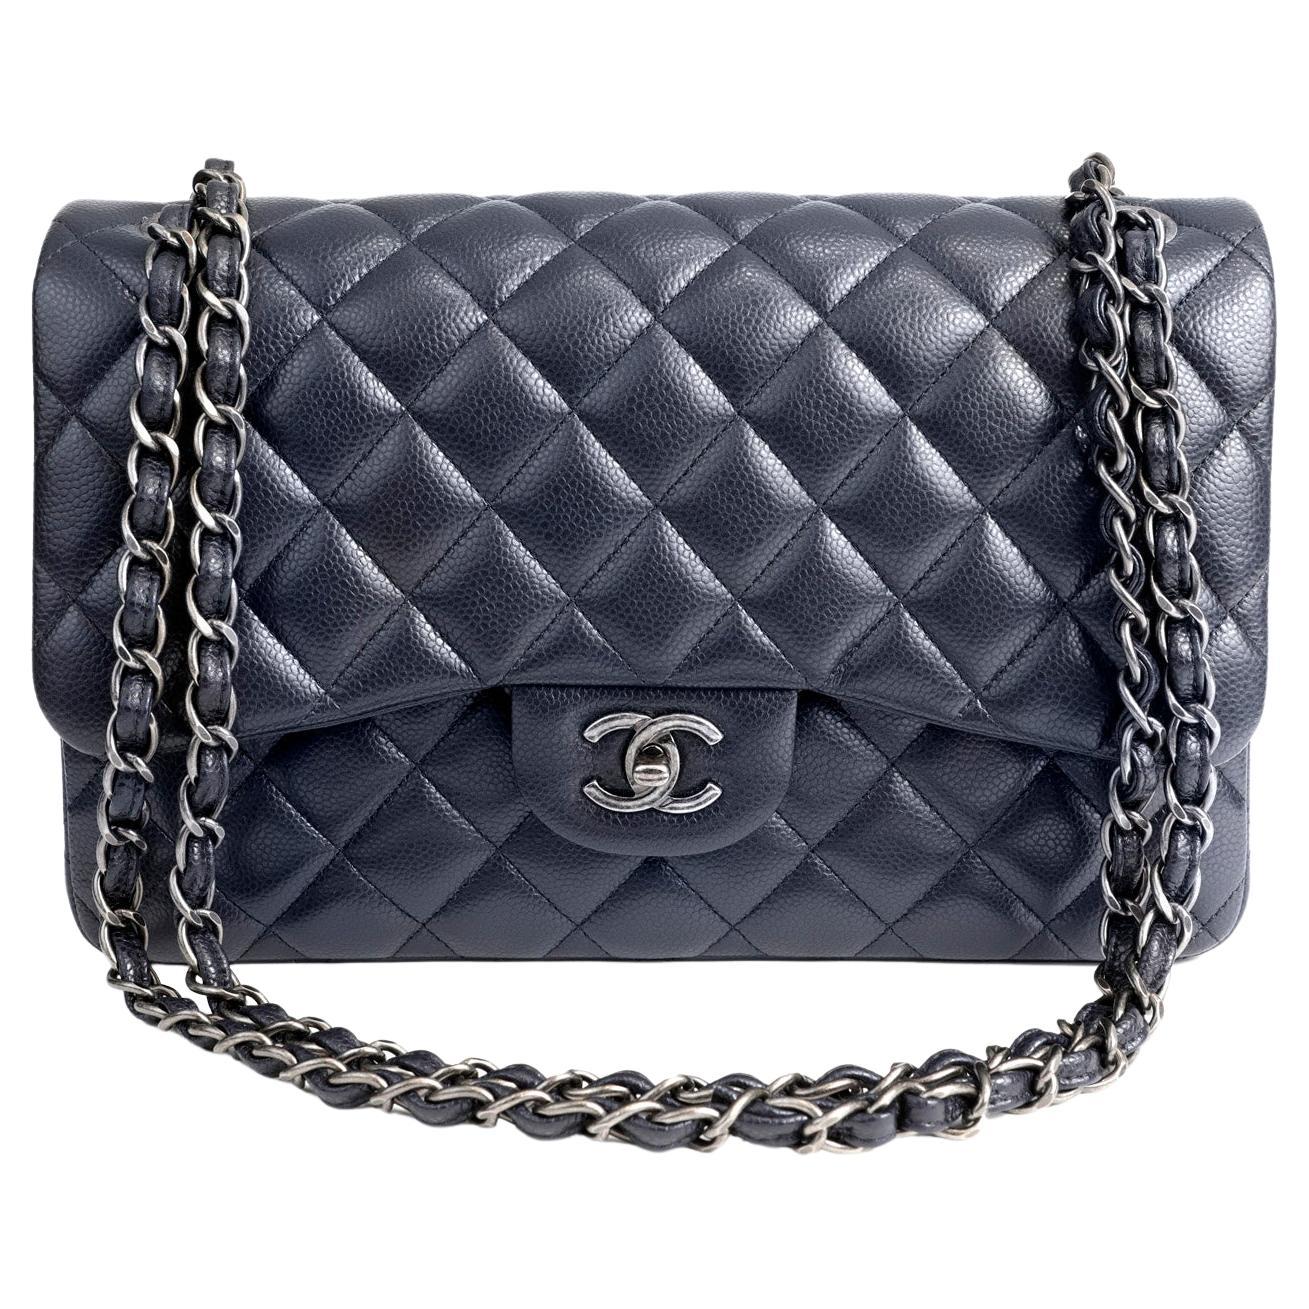 chanel classic leather bag